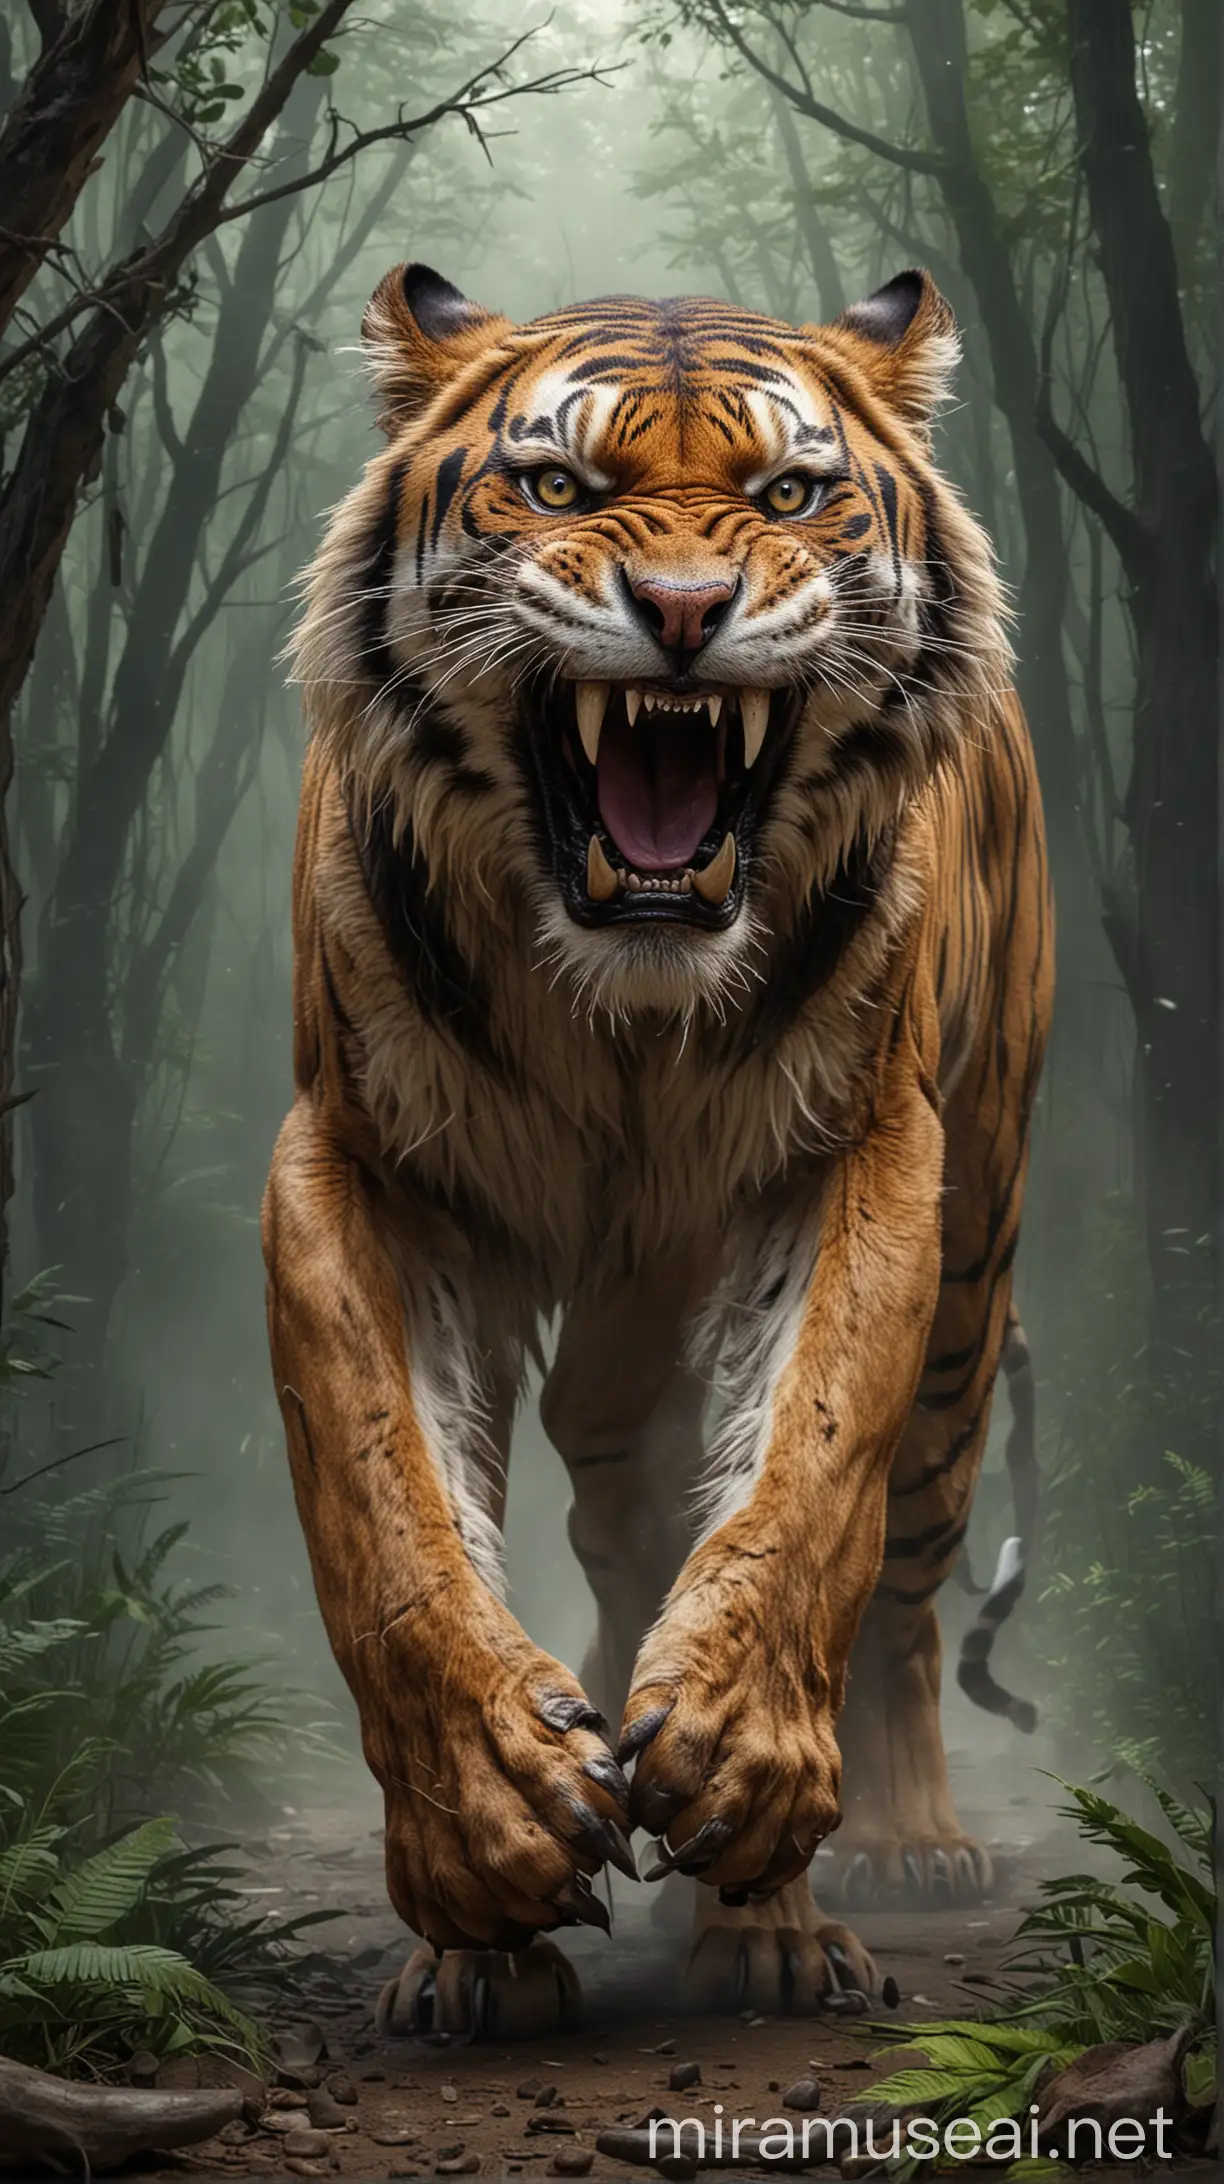 A terrifying saber-toothed tiger 